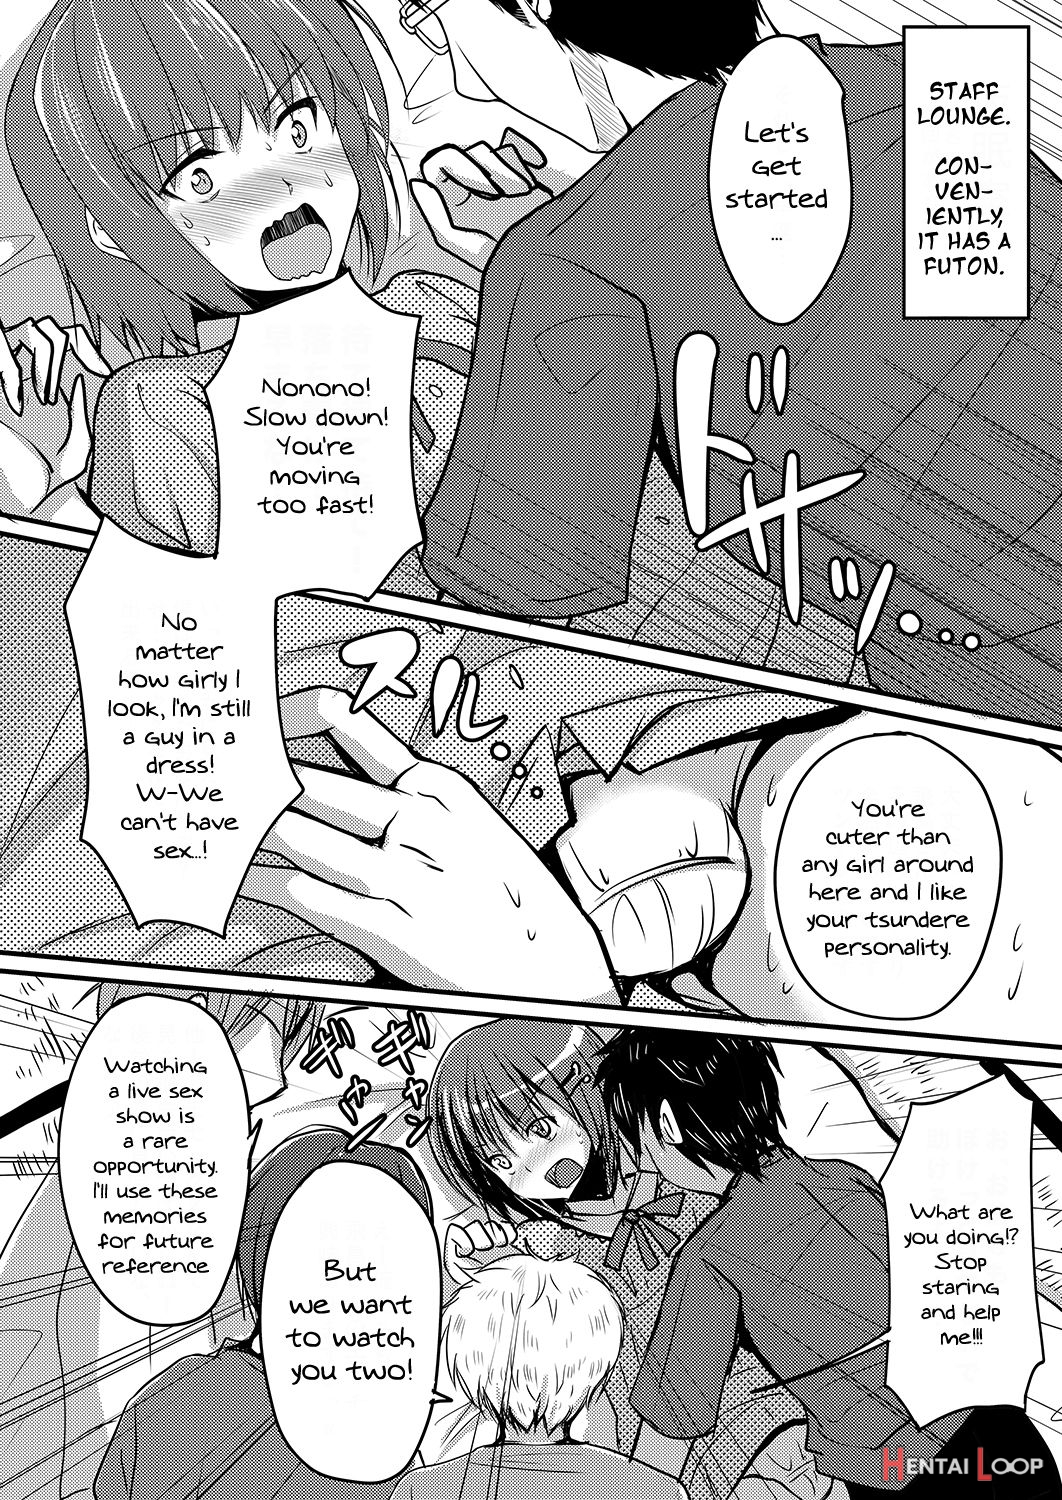 1062px x 1500px - Page 7 of A Porn Author Whose Work Won't Sell Tries Crossdressing To  Understand A Woman's Feelings (by Chieko) - Hentai doujinshi for free at  HentaiLoop